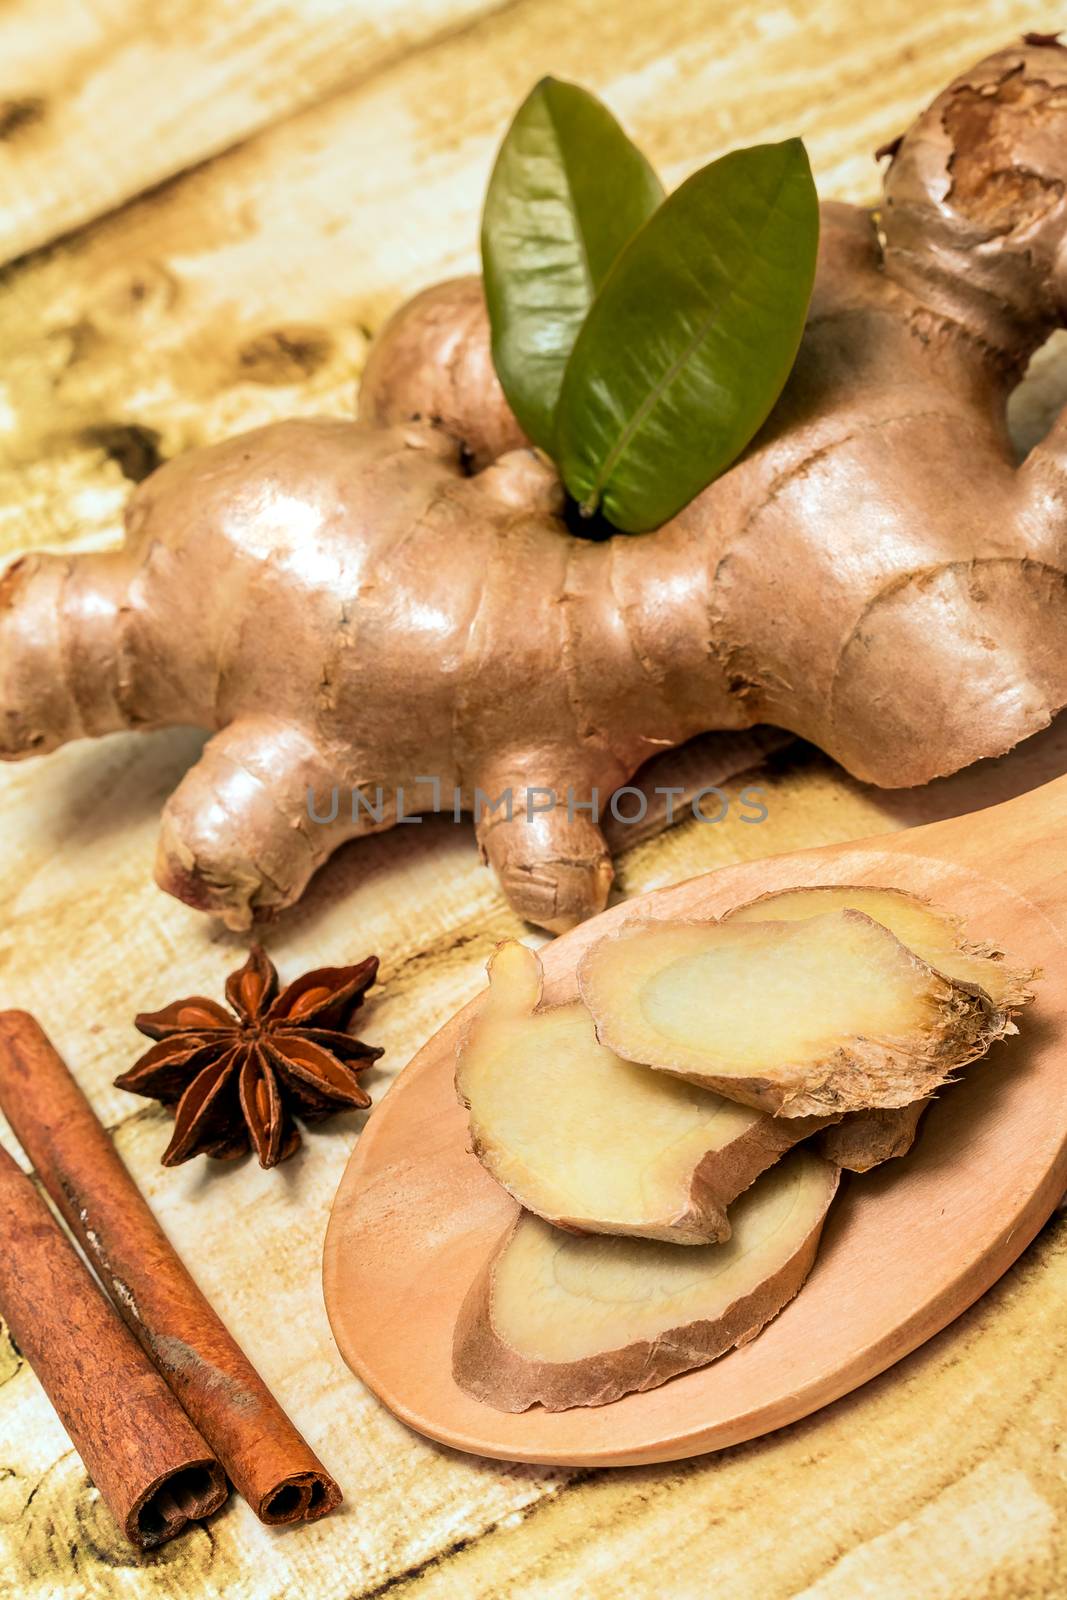 Sliced Ginger Root Indicating Piece Slices And Spice